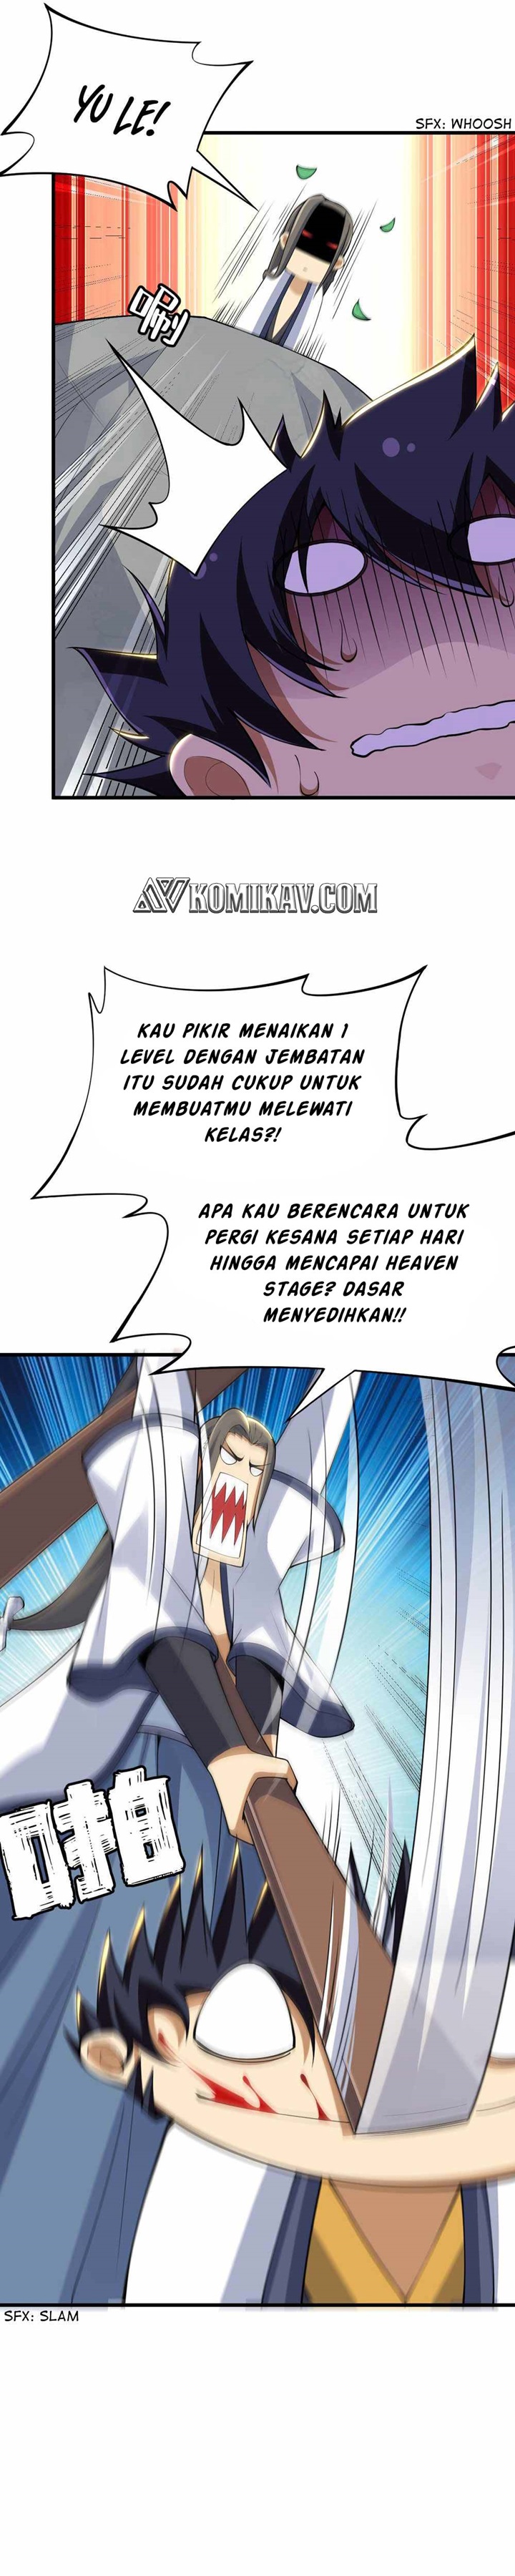 Dilarang COPAS - situs resmi www.mangacanblog.com - Komik i just want to be beaten to death by everyone 036 - chapter 36 37 Indonesia i just want to be beaten to death by everyone 036 - chapter 36 Terbaru 6|Baca Manga Komik Indonesia|Mangacan